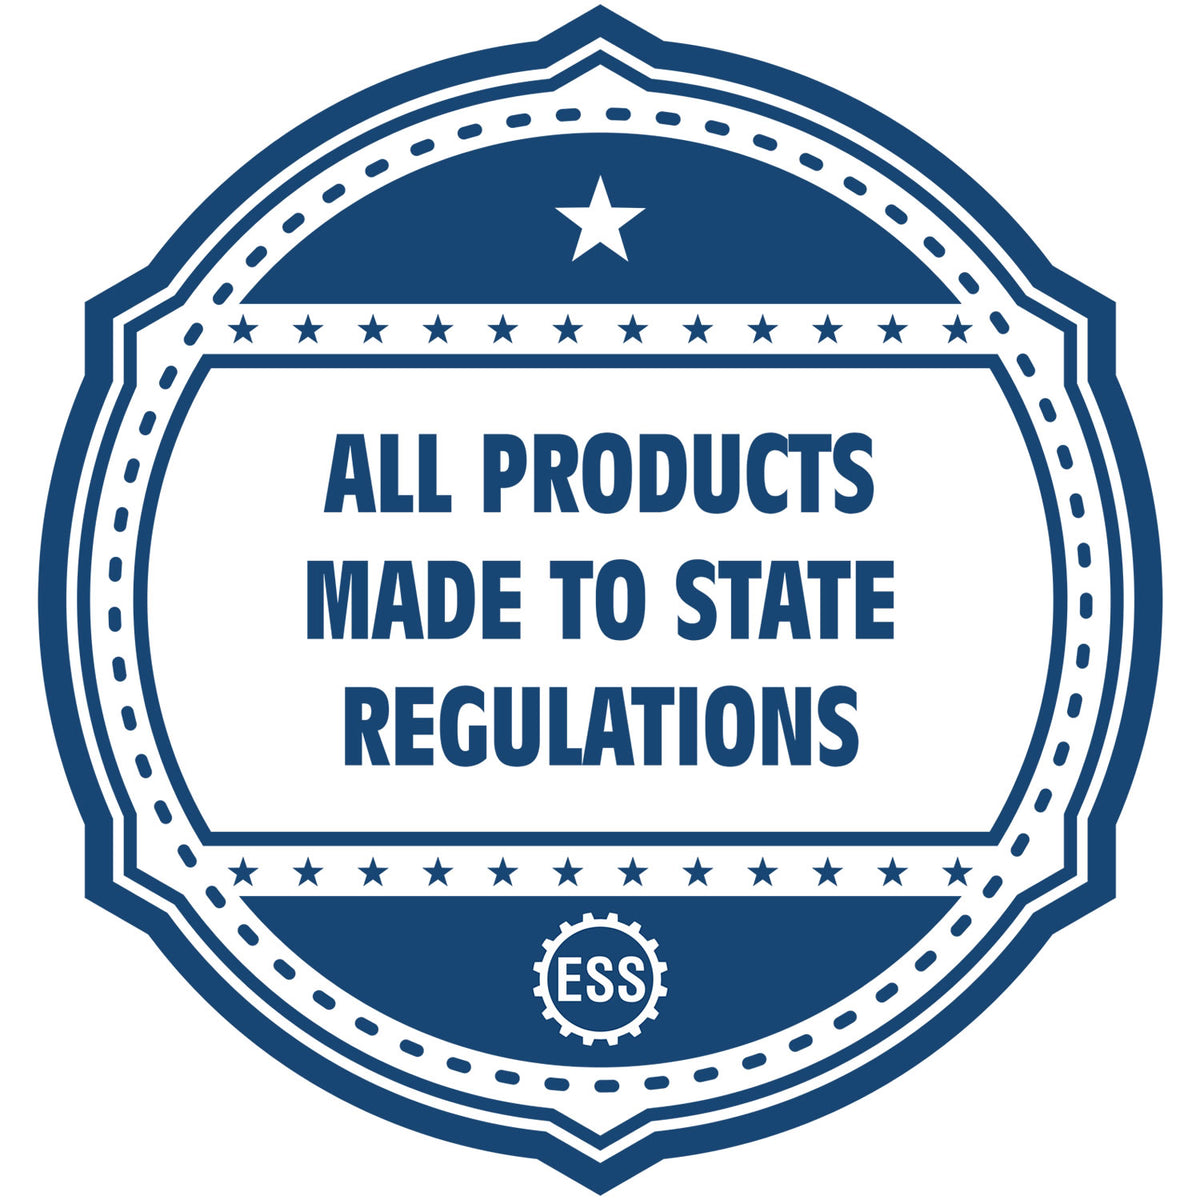 An icon or badge element for the Extended Long Reach Maryland Architect Seal Embosser showing that this product is made in compliance with state regulations.